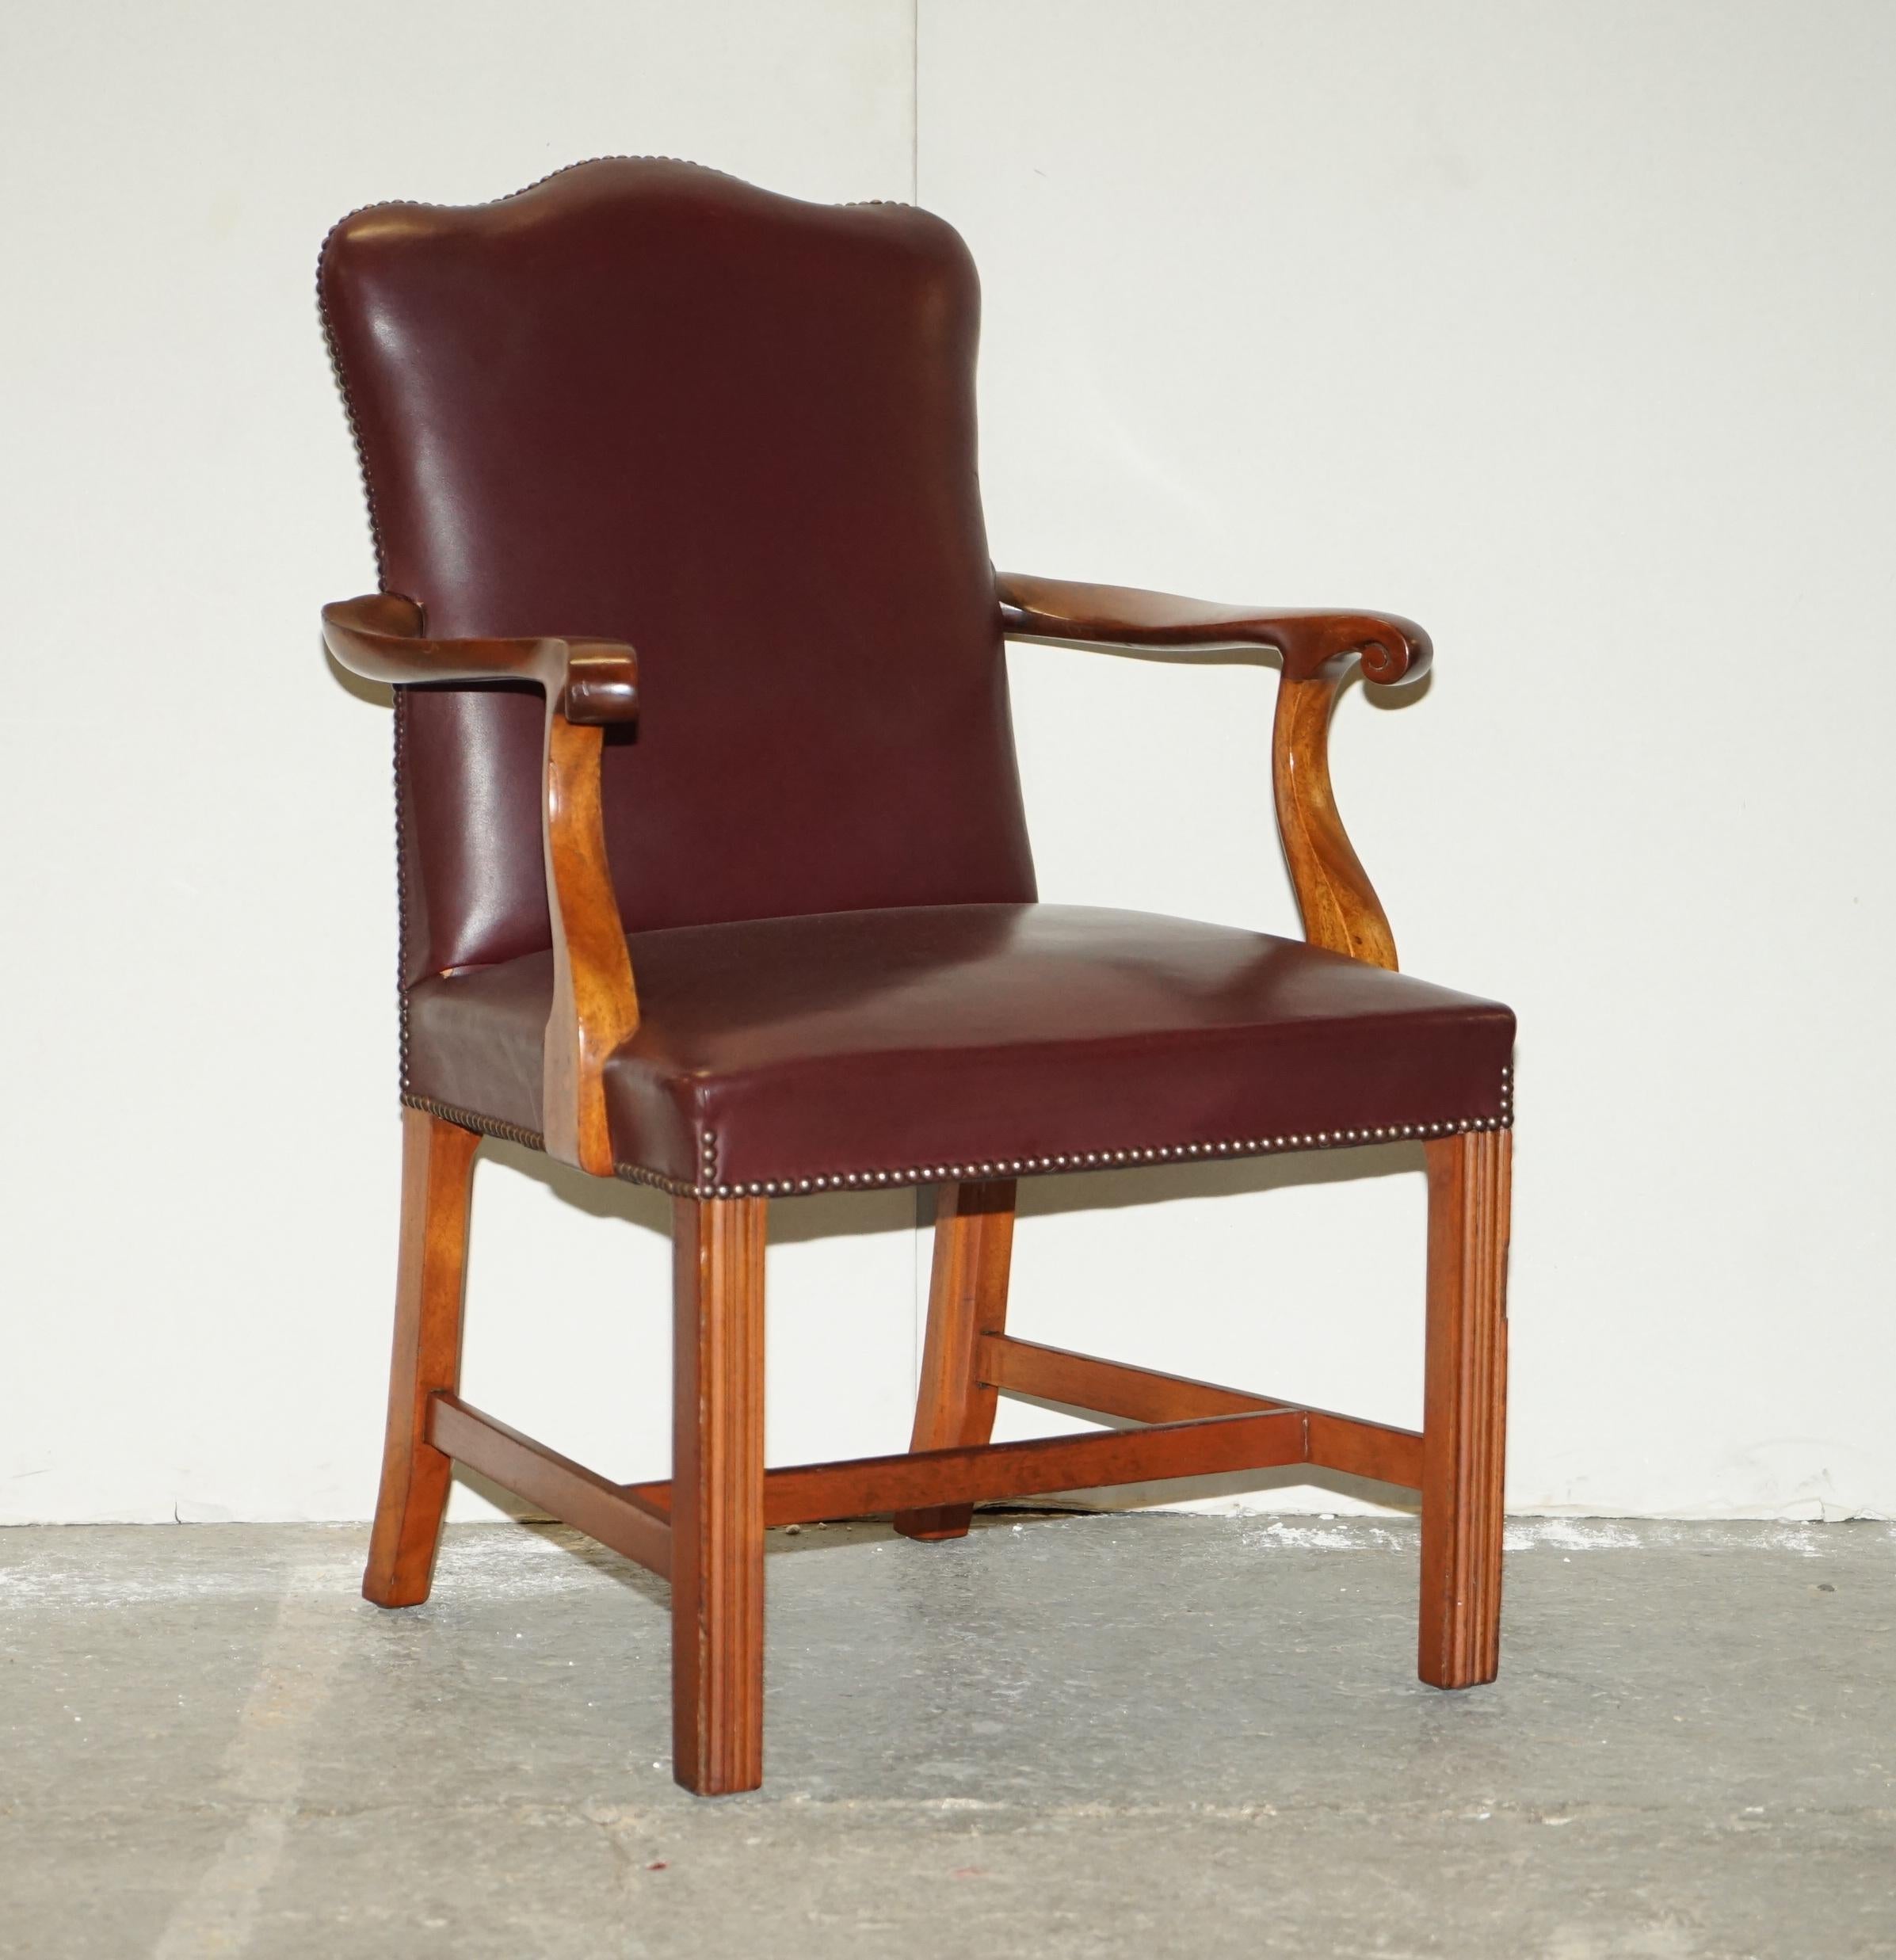 LEATHER CARVER OFFICE CHAIR FROM PRINCESS DIANA'S FAMILY ESTATE SPENCER HOUSE (Viktorianisch) im Angebot